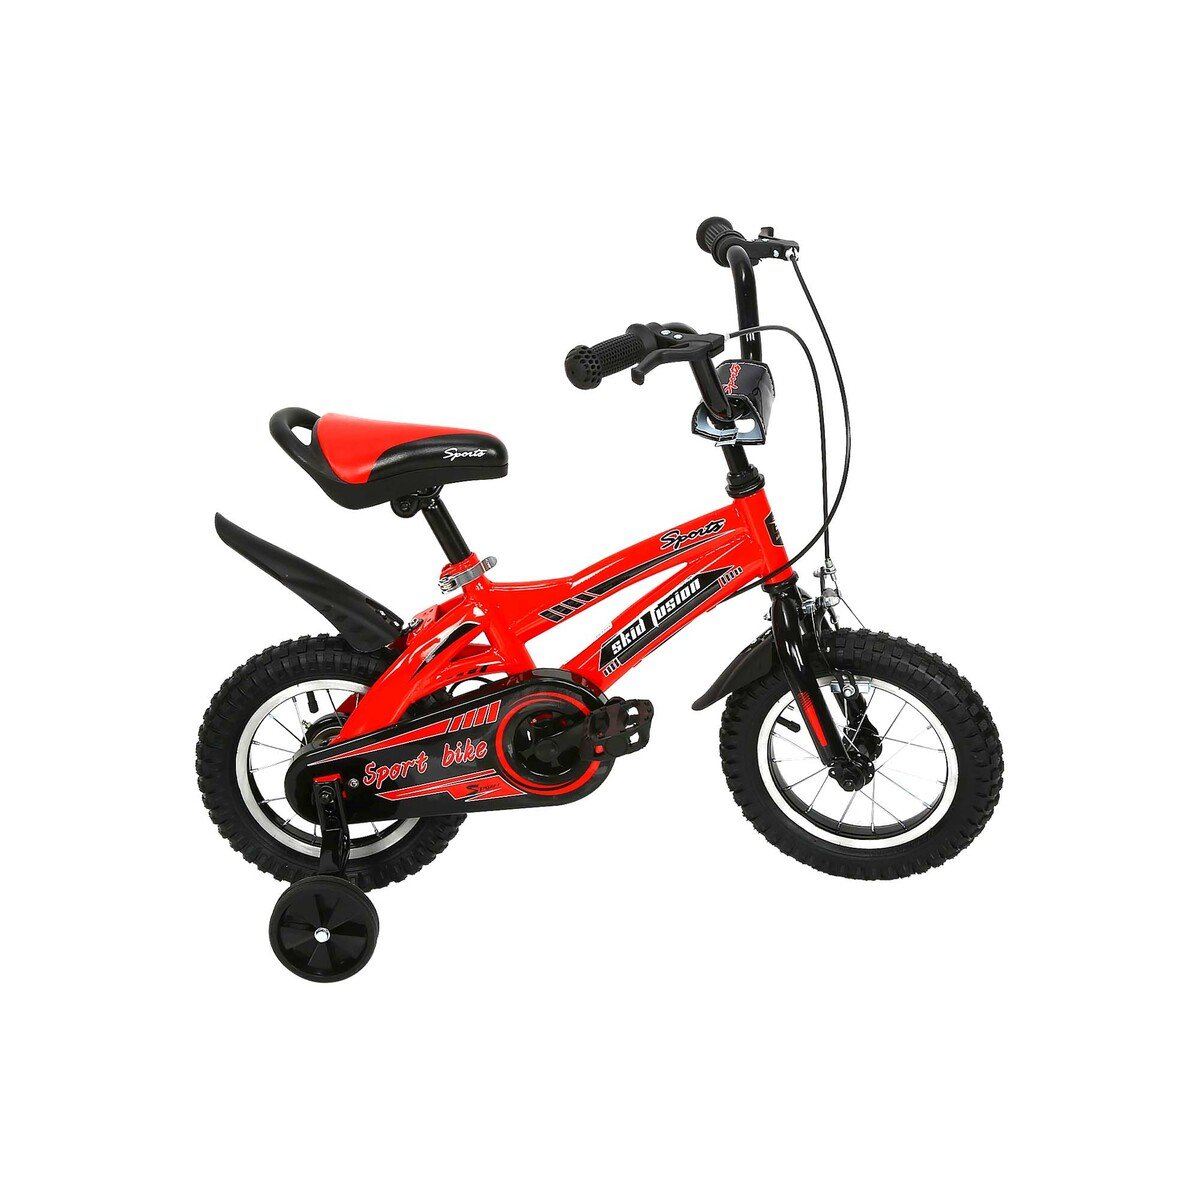 Skid Fusion Kids Bicycle 12" BMX-616C Assorted Color